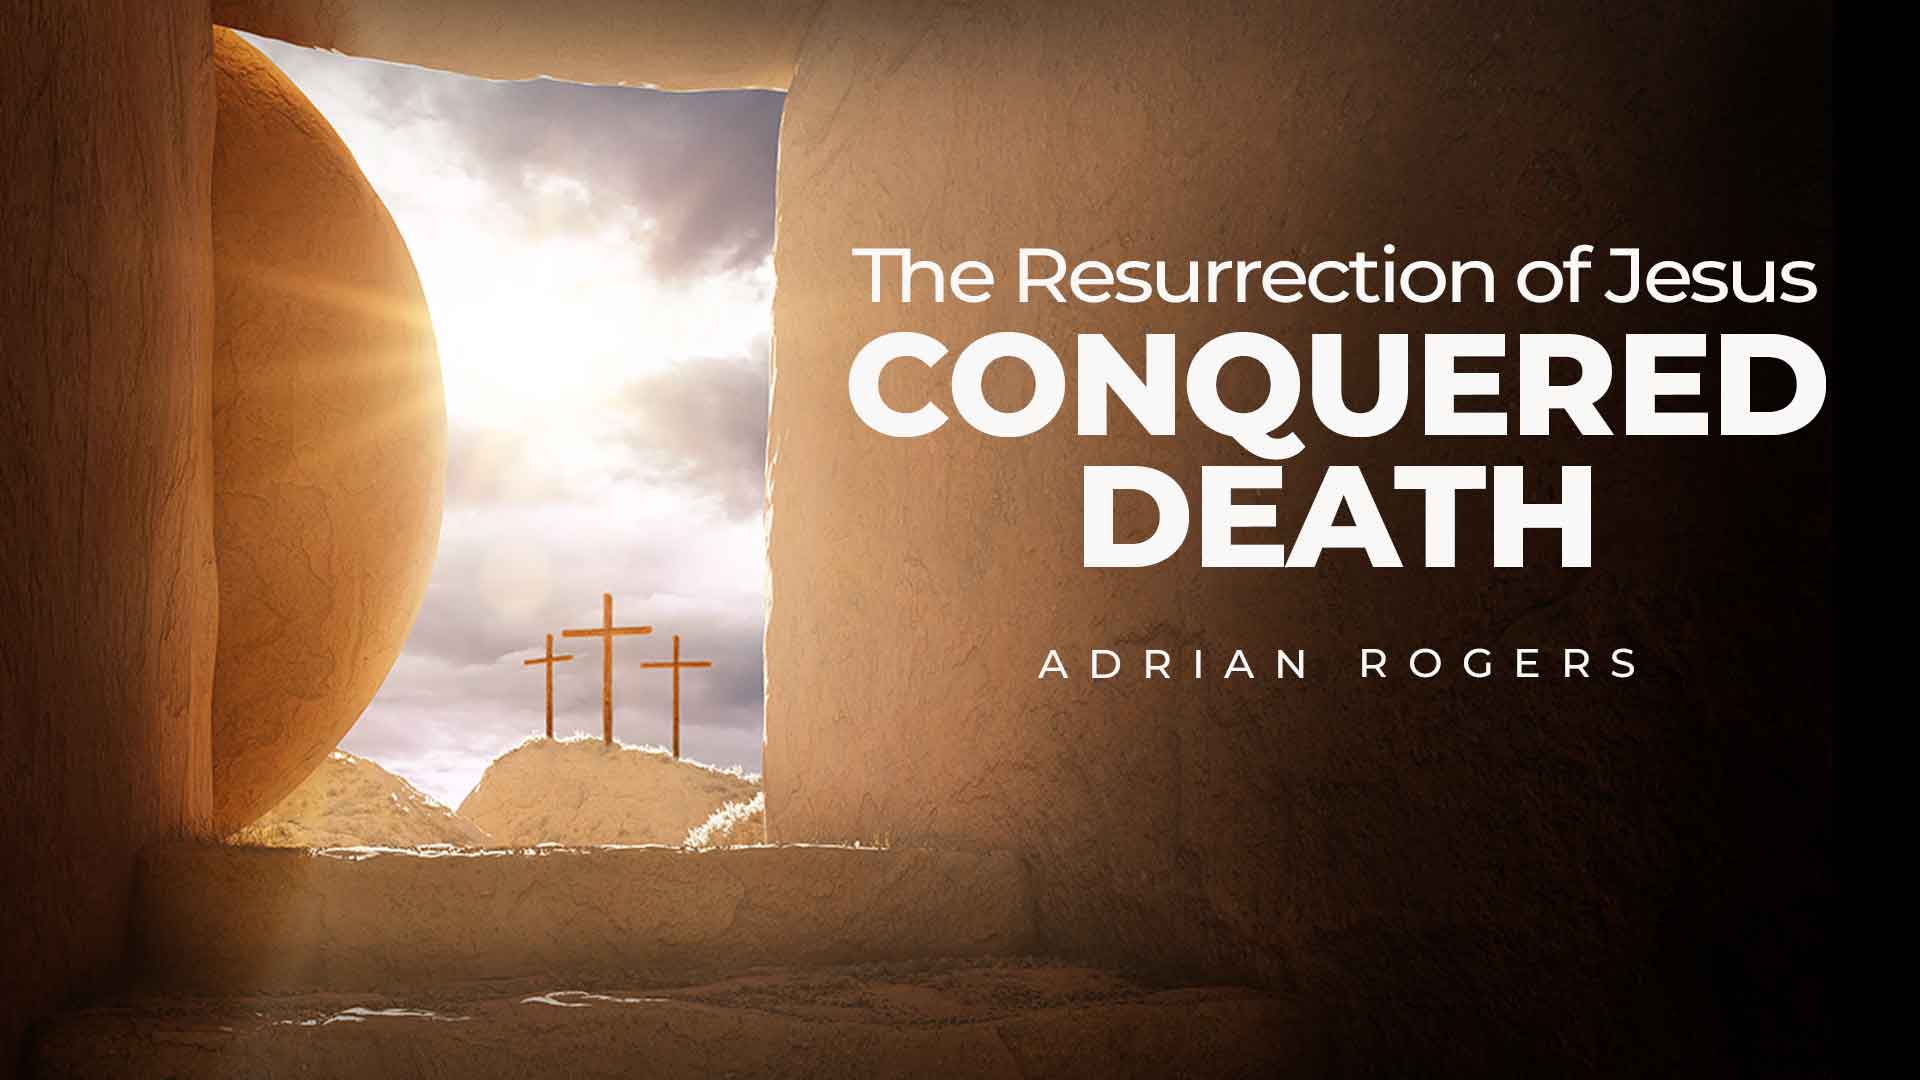 The Resurrection of Jesus Conquered Death 1920x1080 Article Image